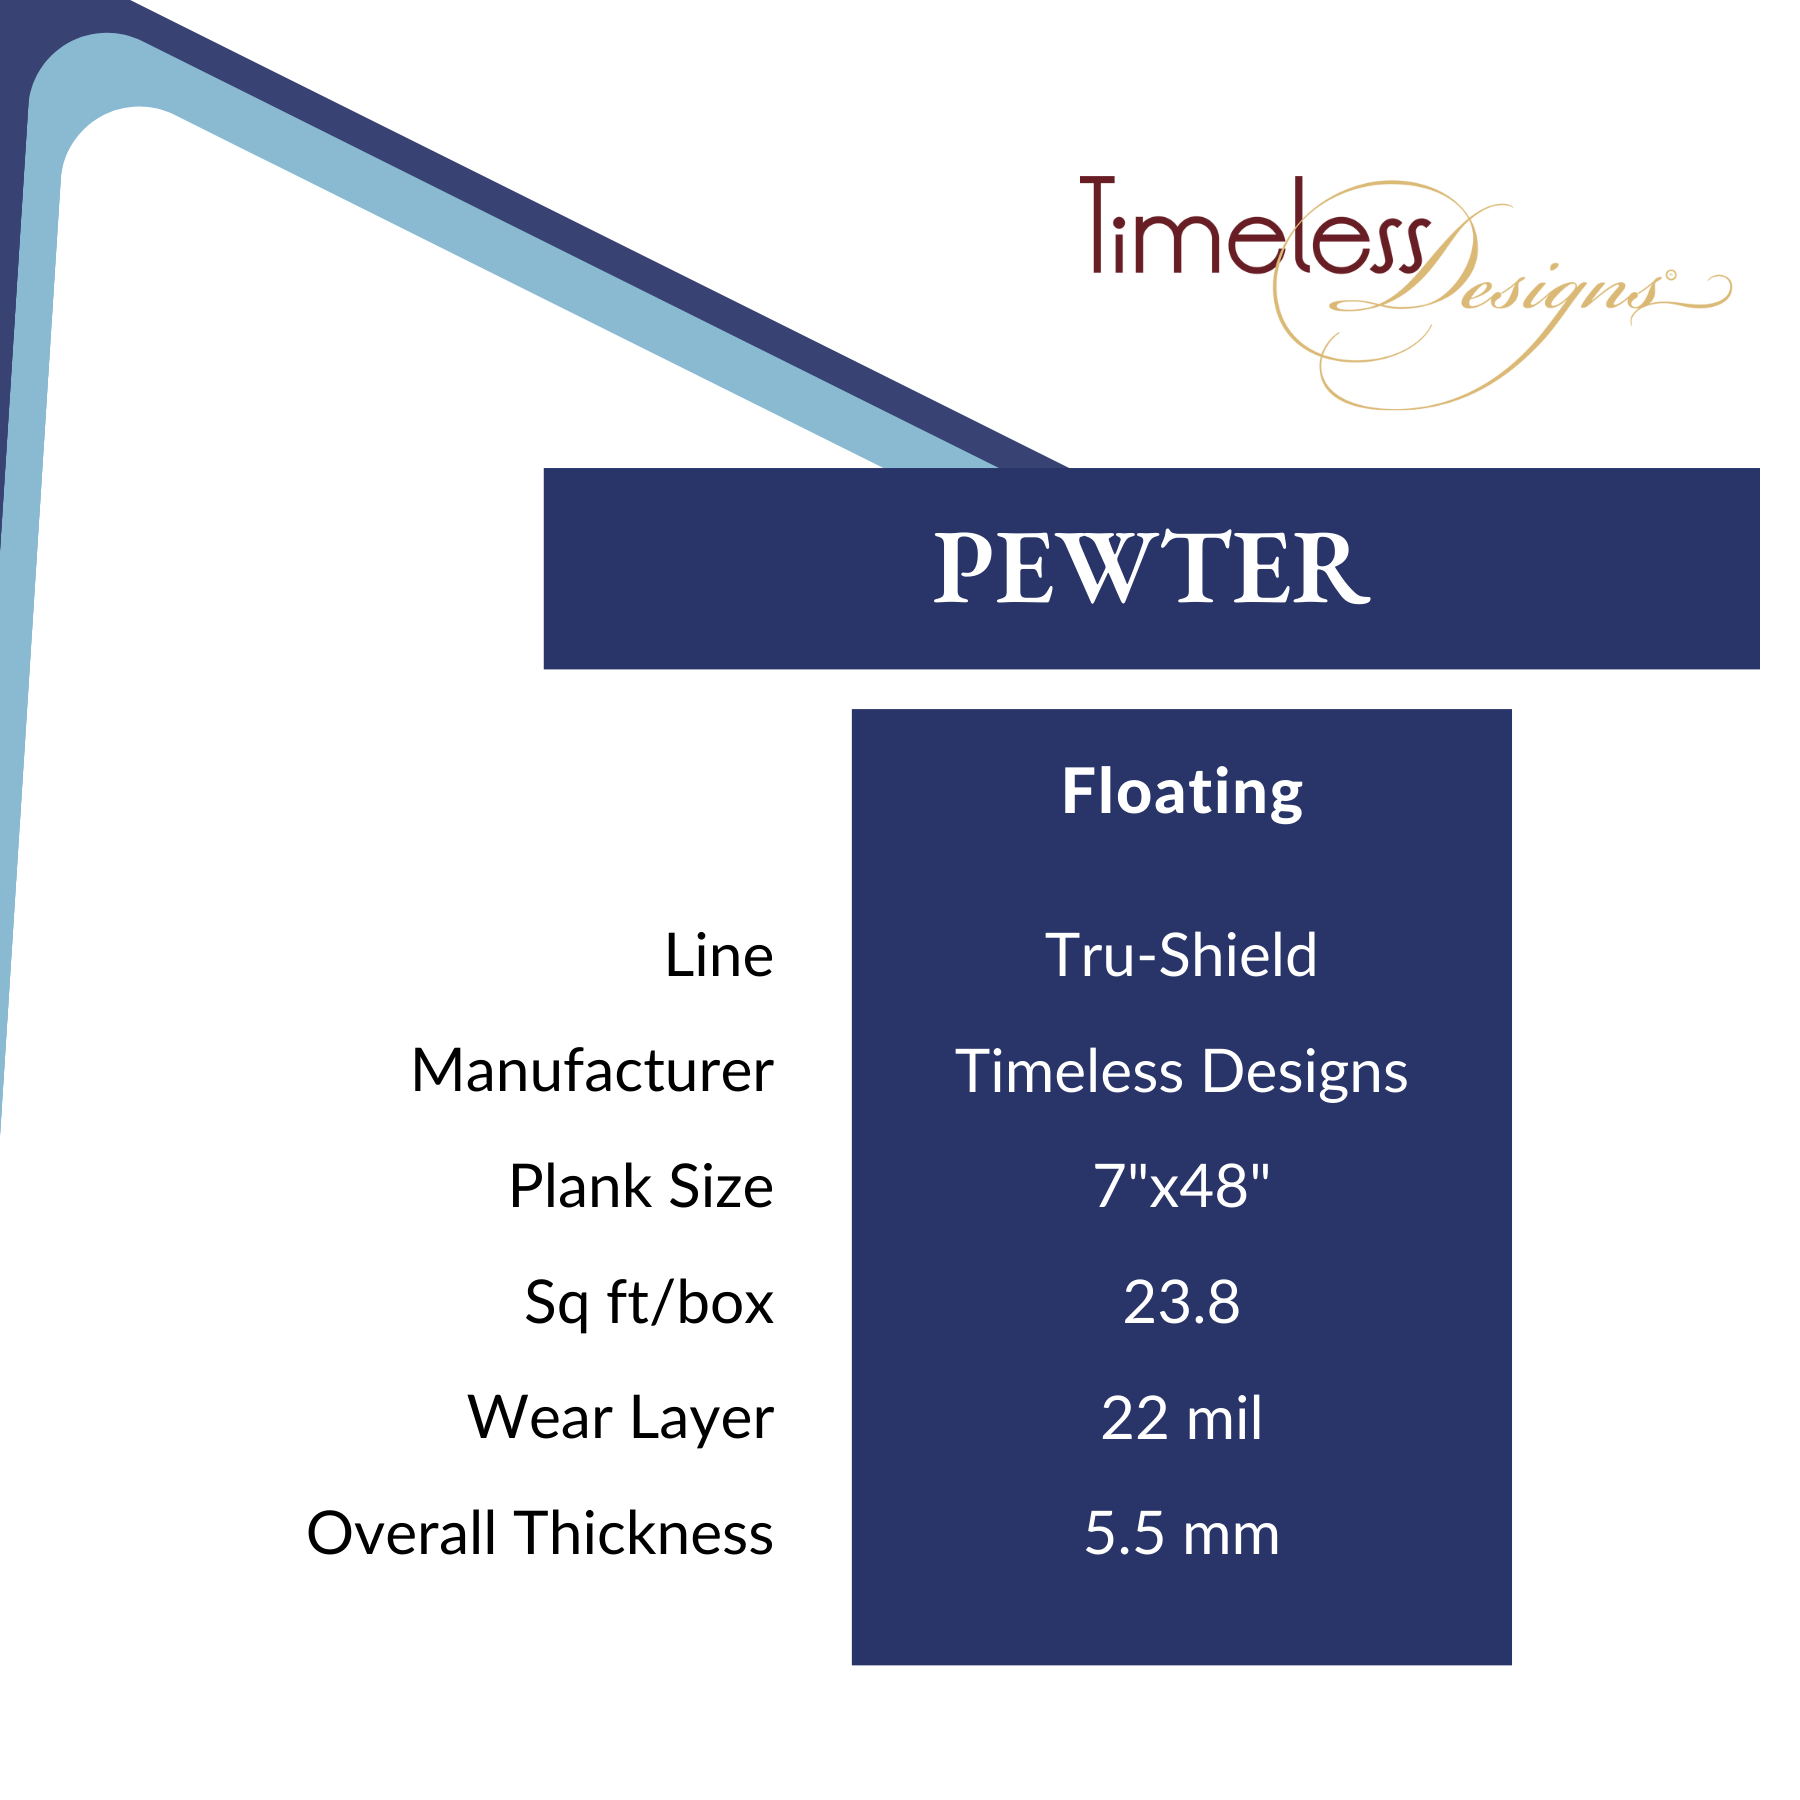 Pewter by Timeless Designs, Clearance at Calhoun's in Springfield, IL Specs